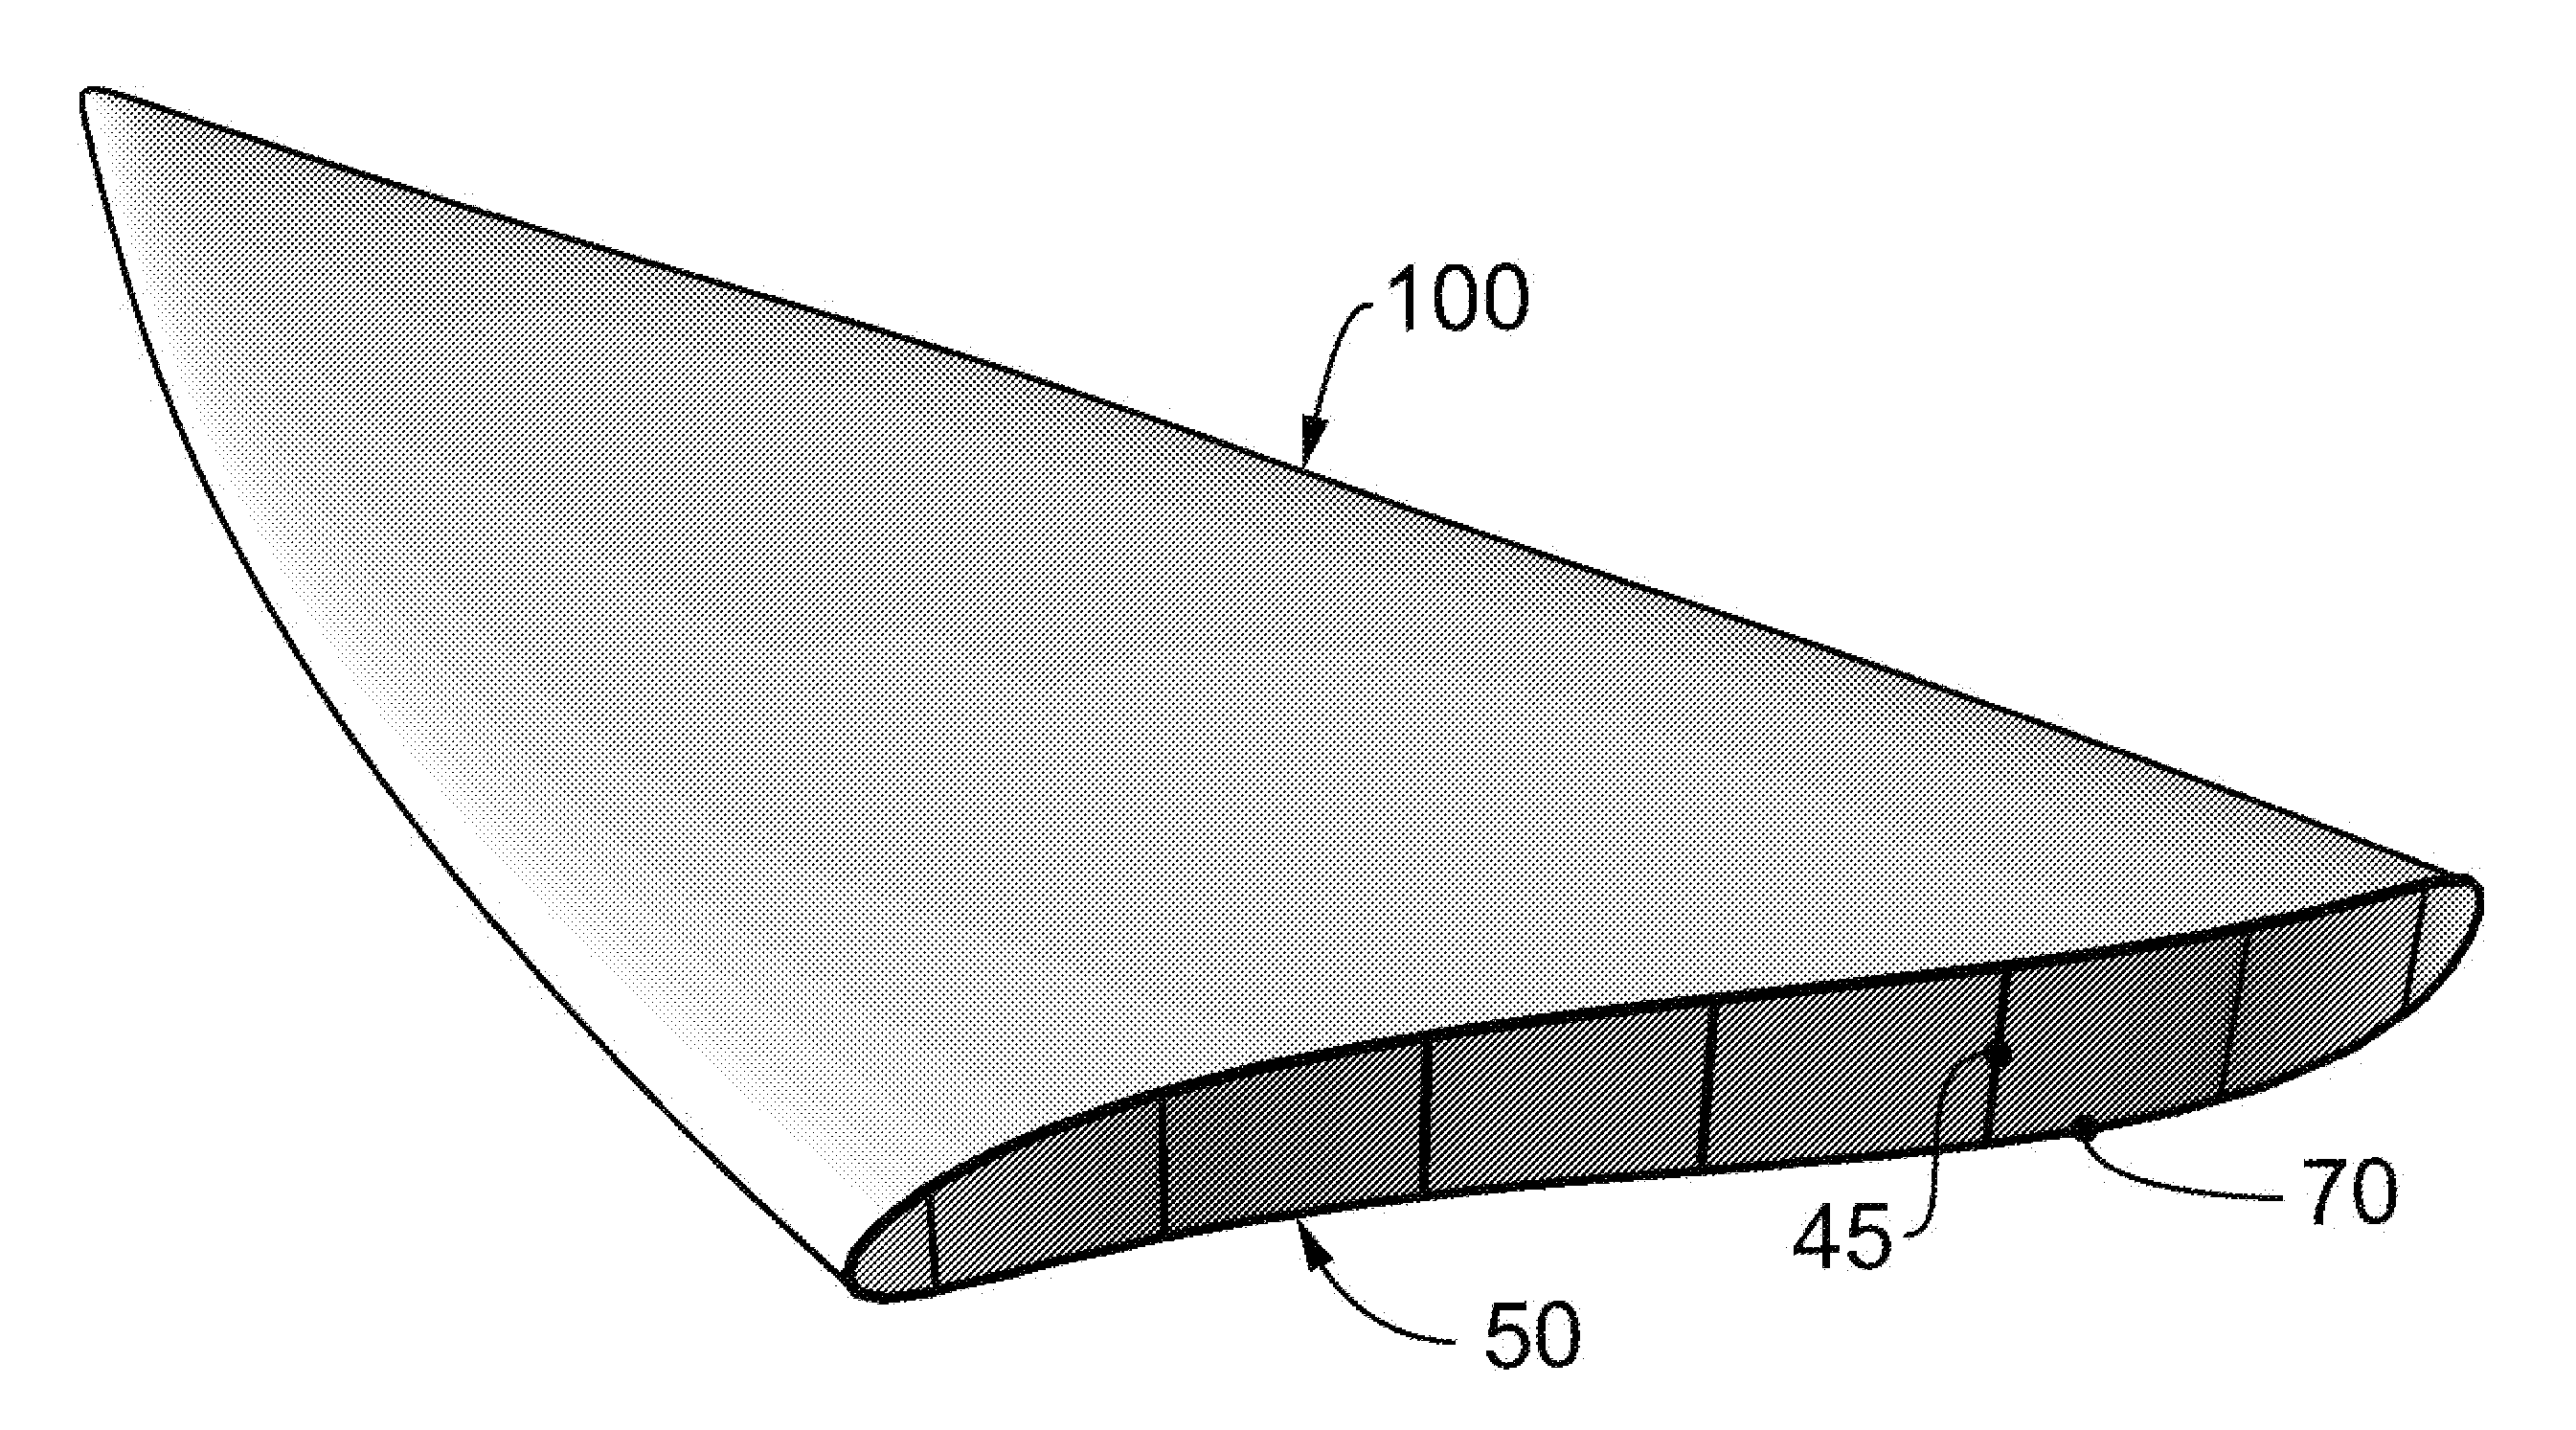 Method of making a 3D object from composite material